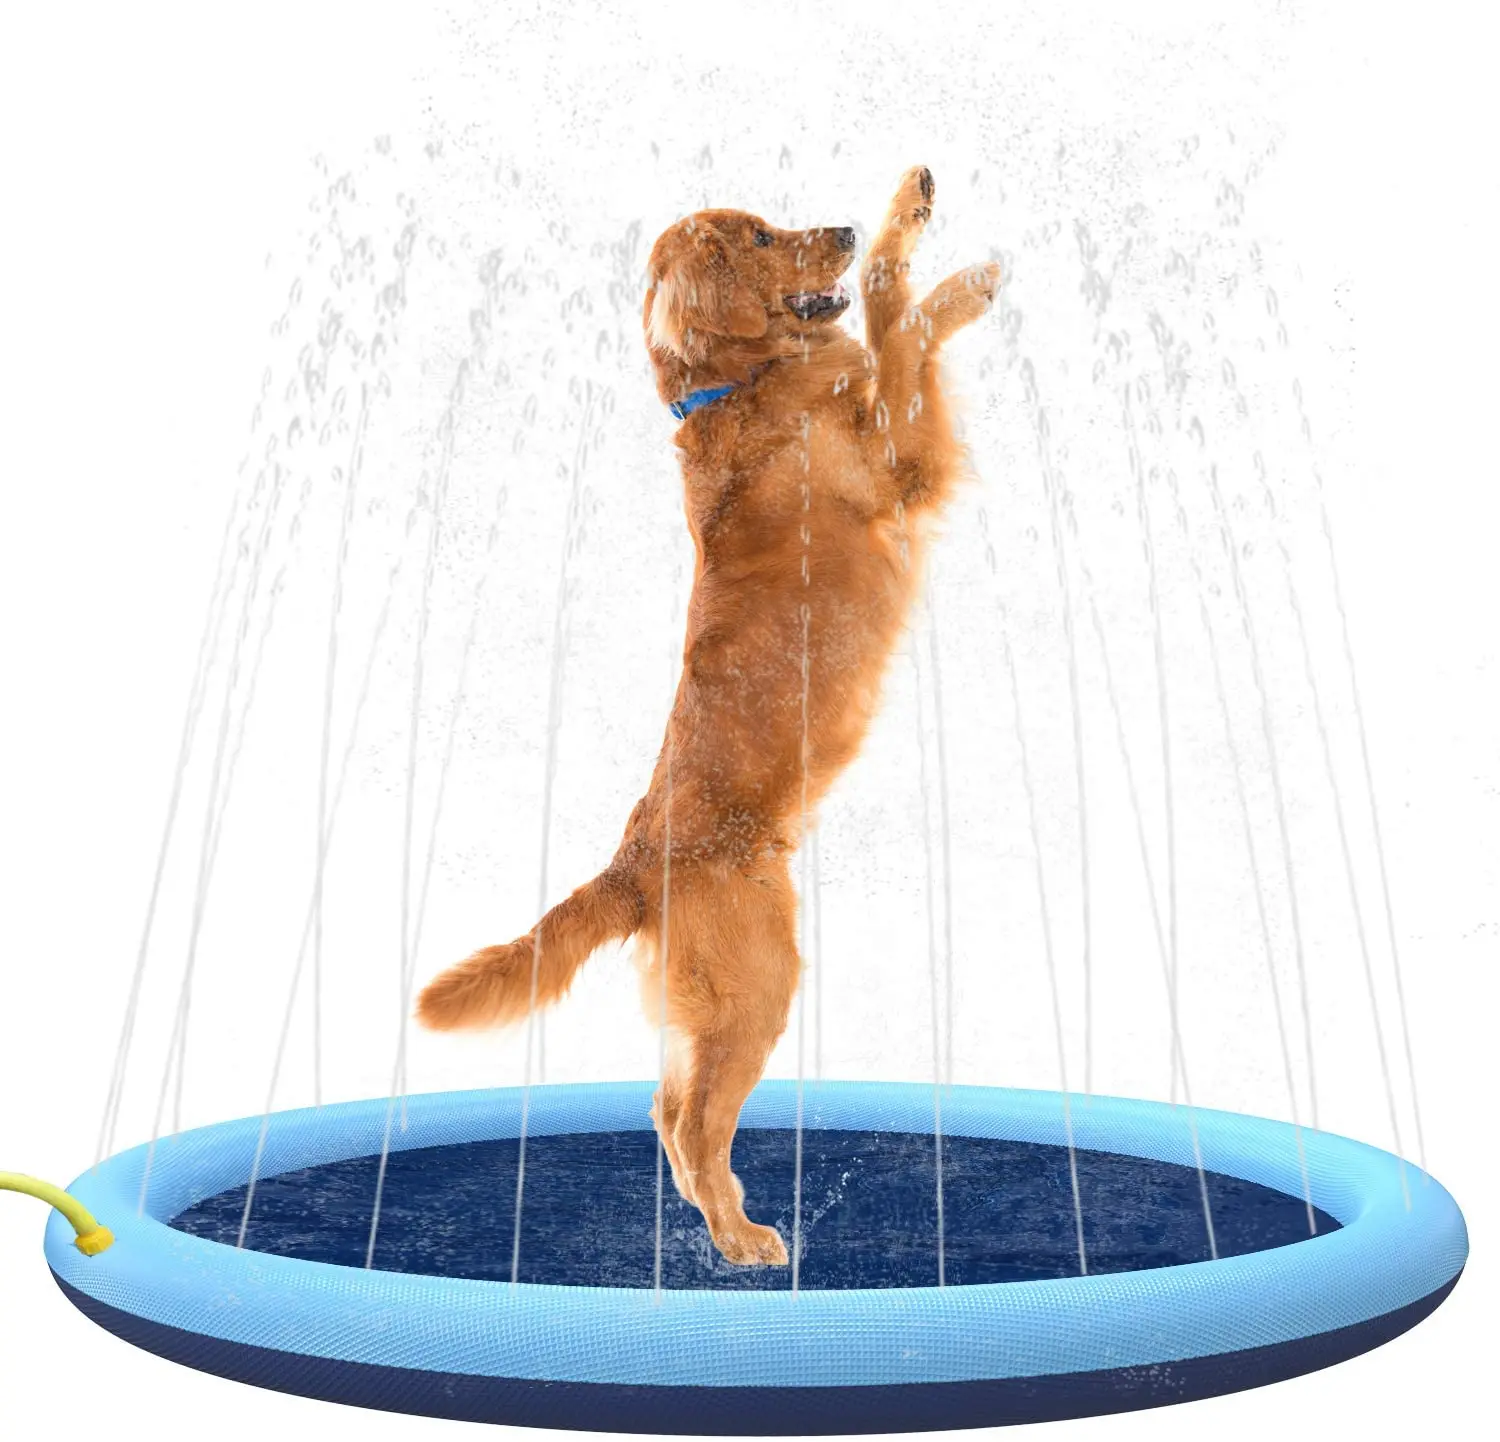 

Summer Outdoor Water Toys Dog Bath Pool Thickened Splash Sprinkler Pad for Dogs Kids, Customized color